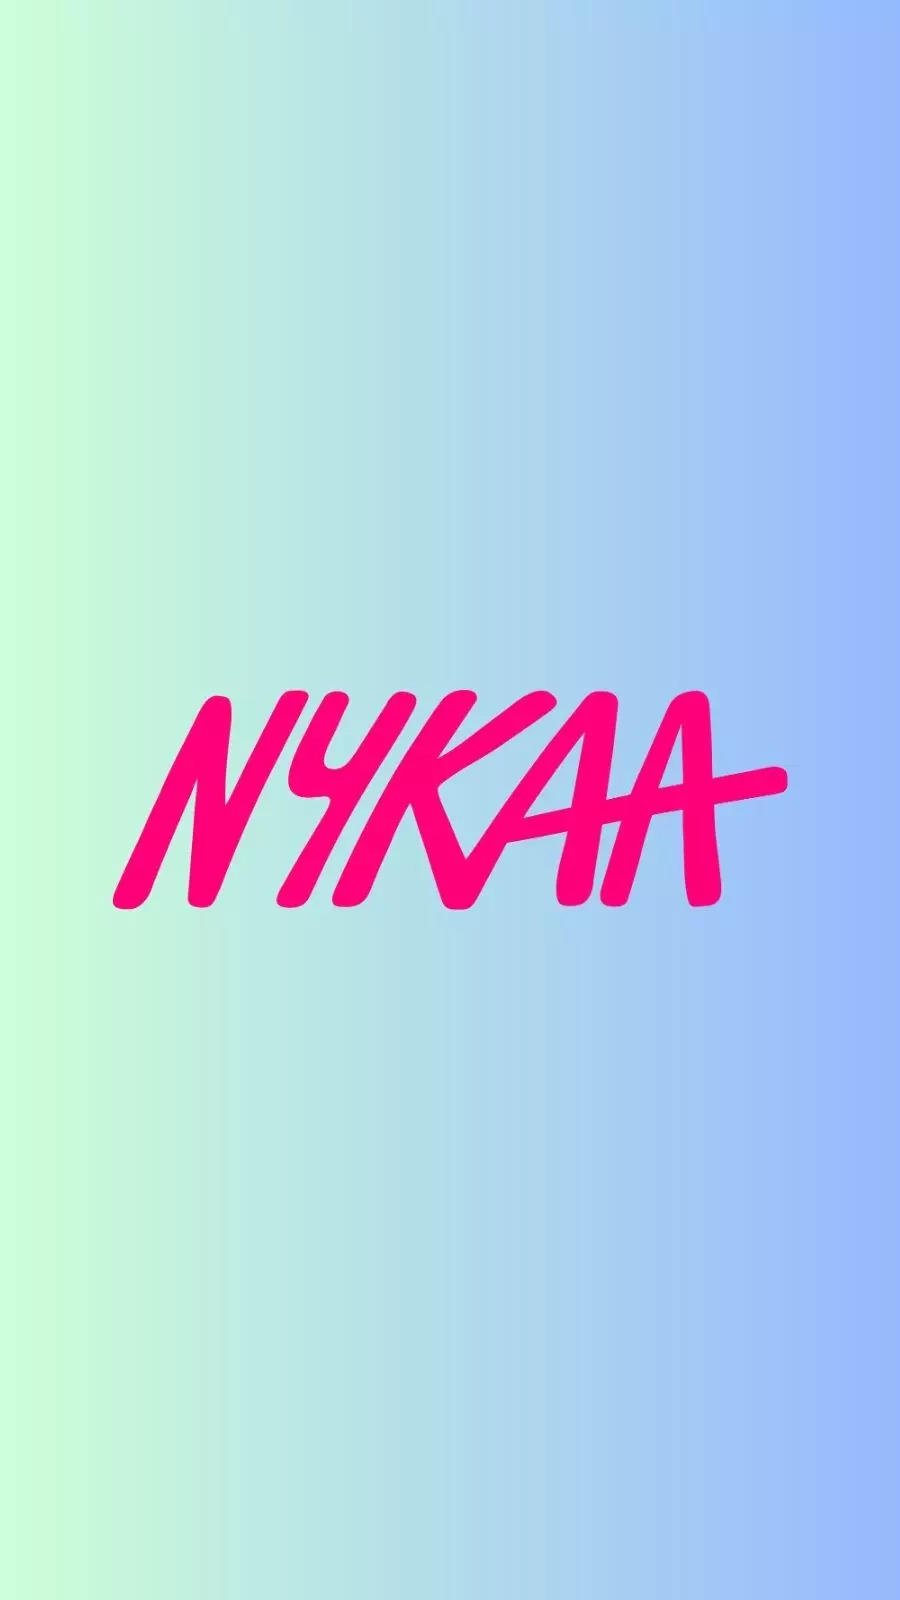 Why is Everyone Talking About Nykaa? | by Terasol Technologies | Medium